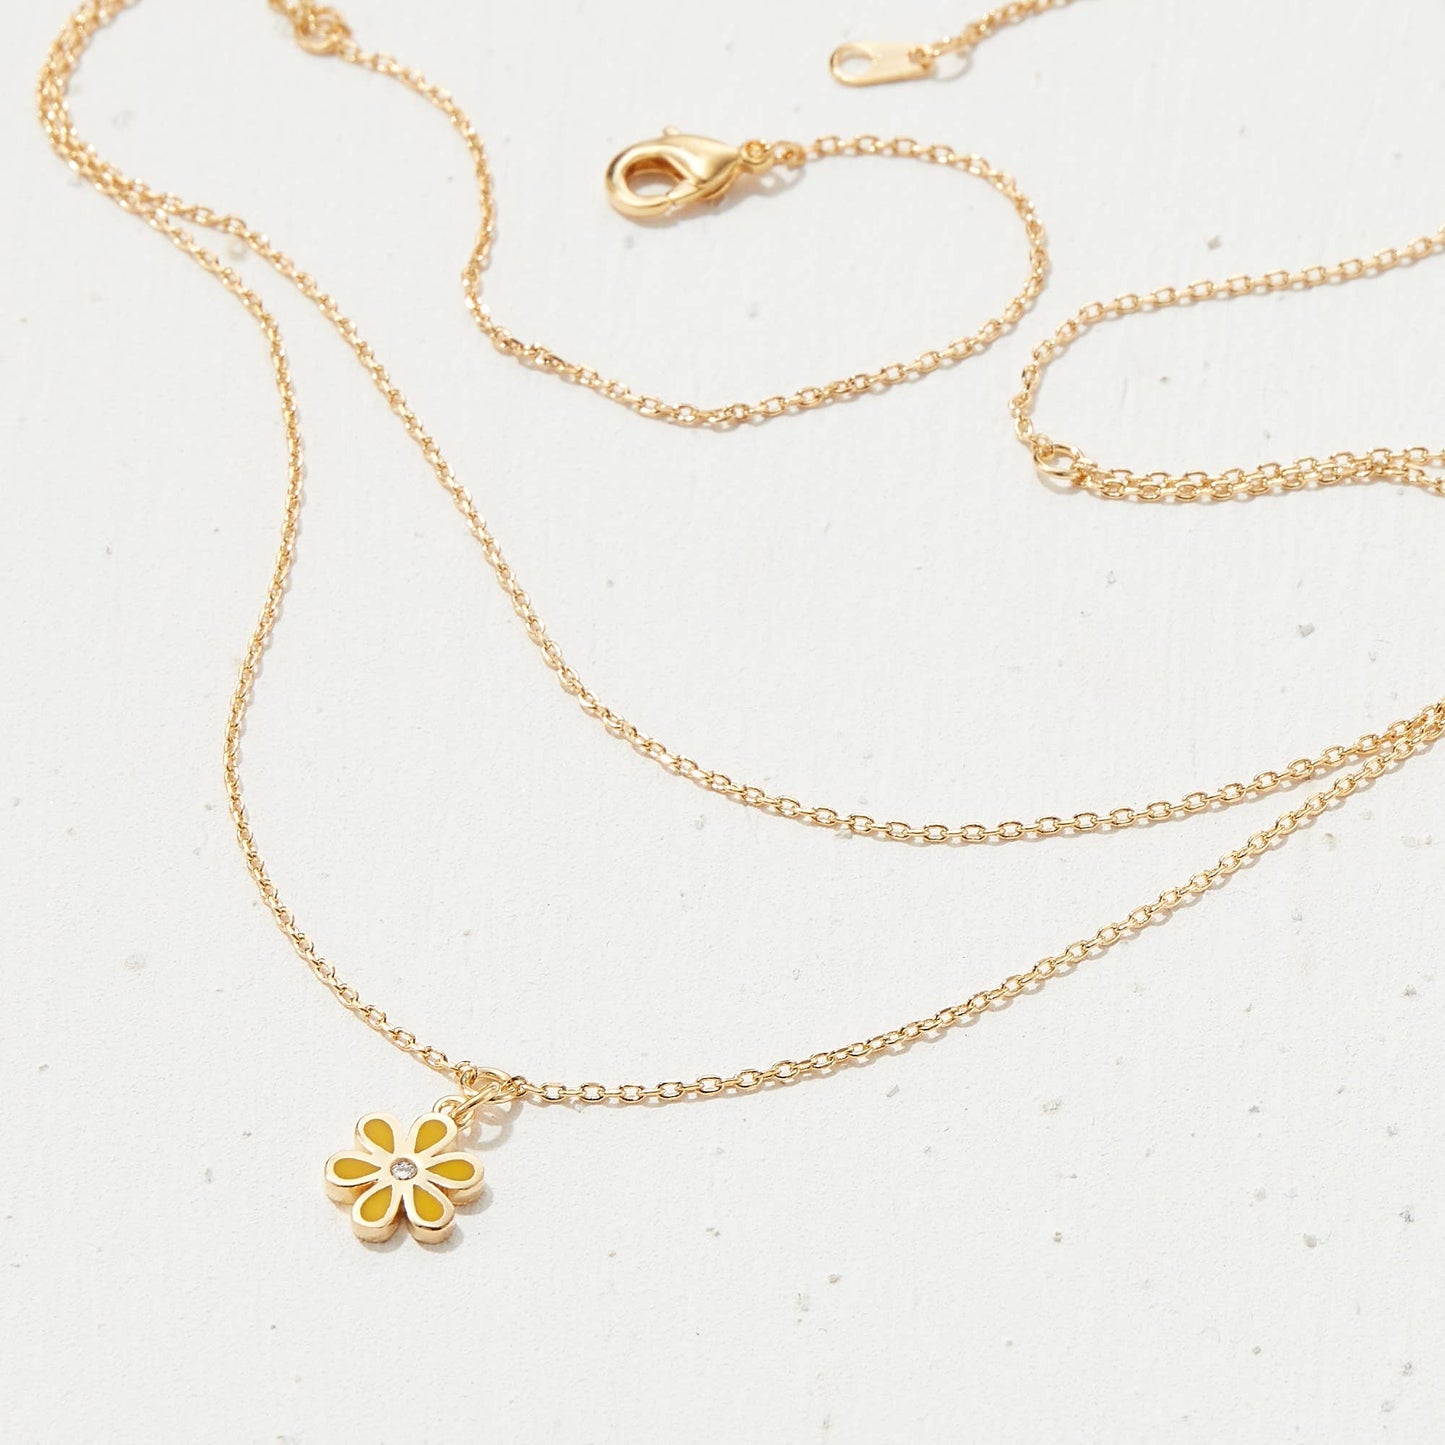 Gold Dipped Dainty Flower Pendant Layered Necklace